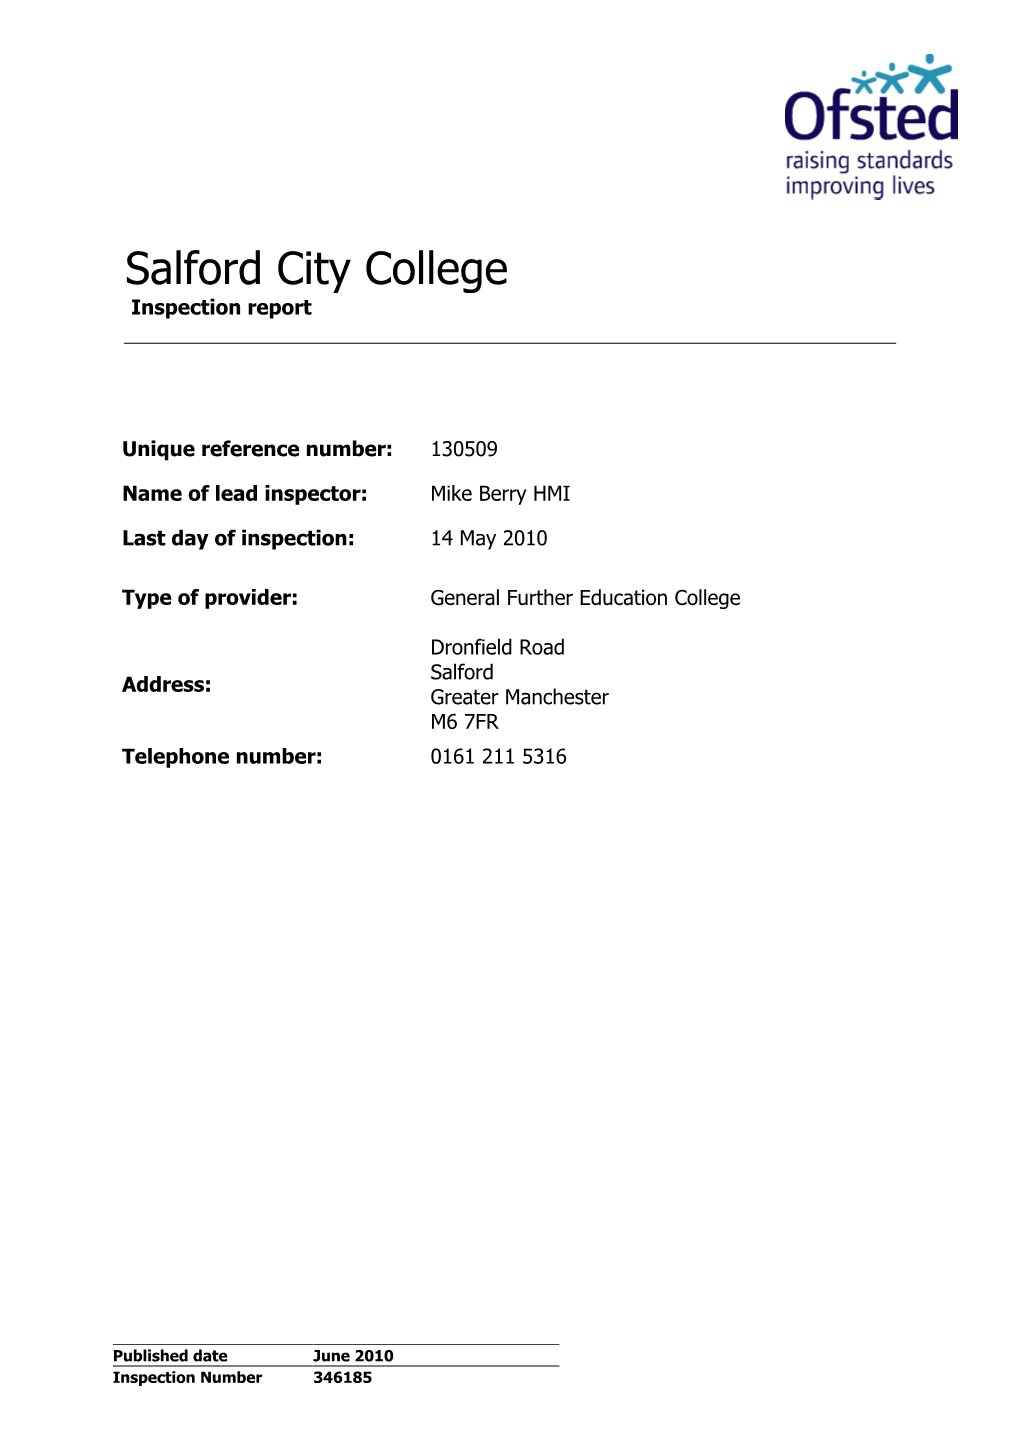 Salford City College Inspection Report